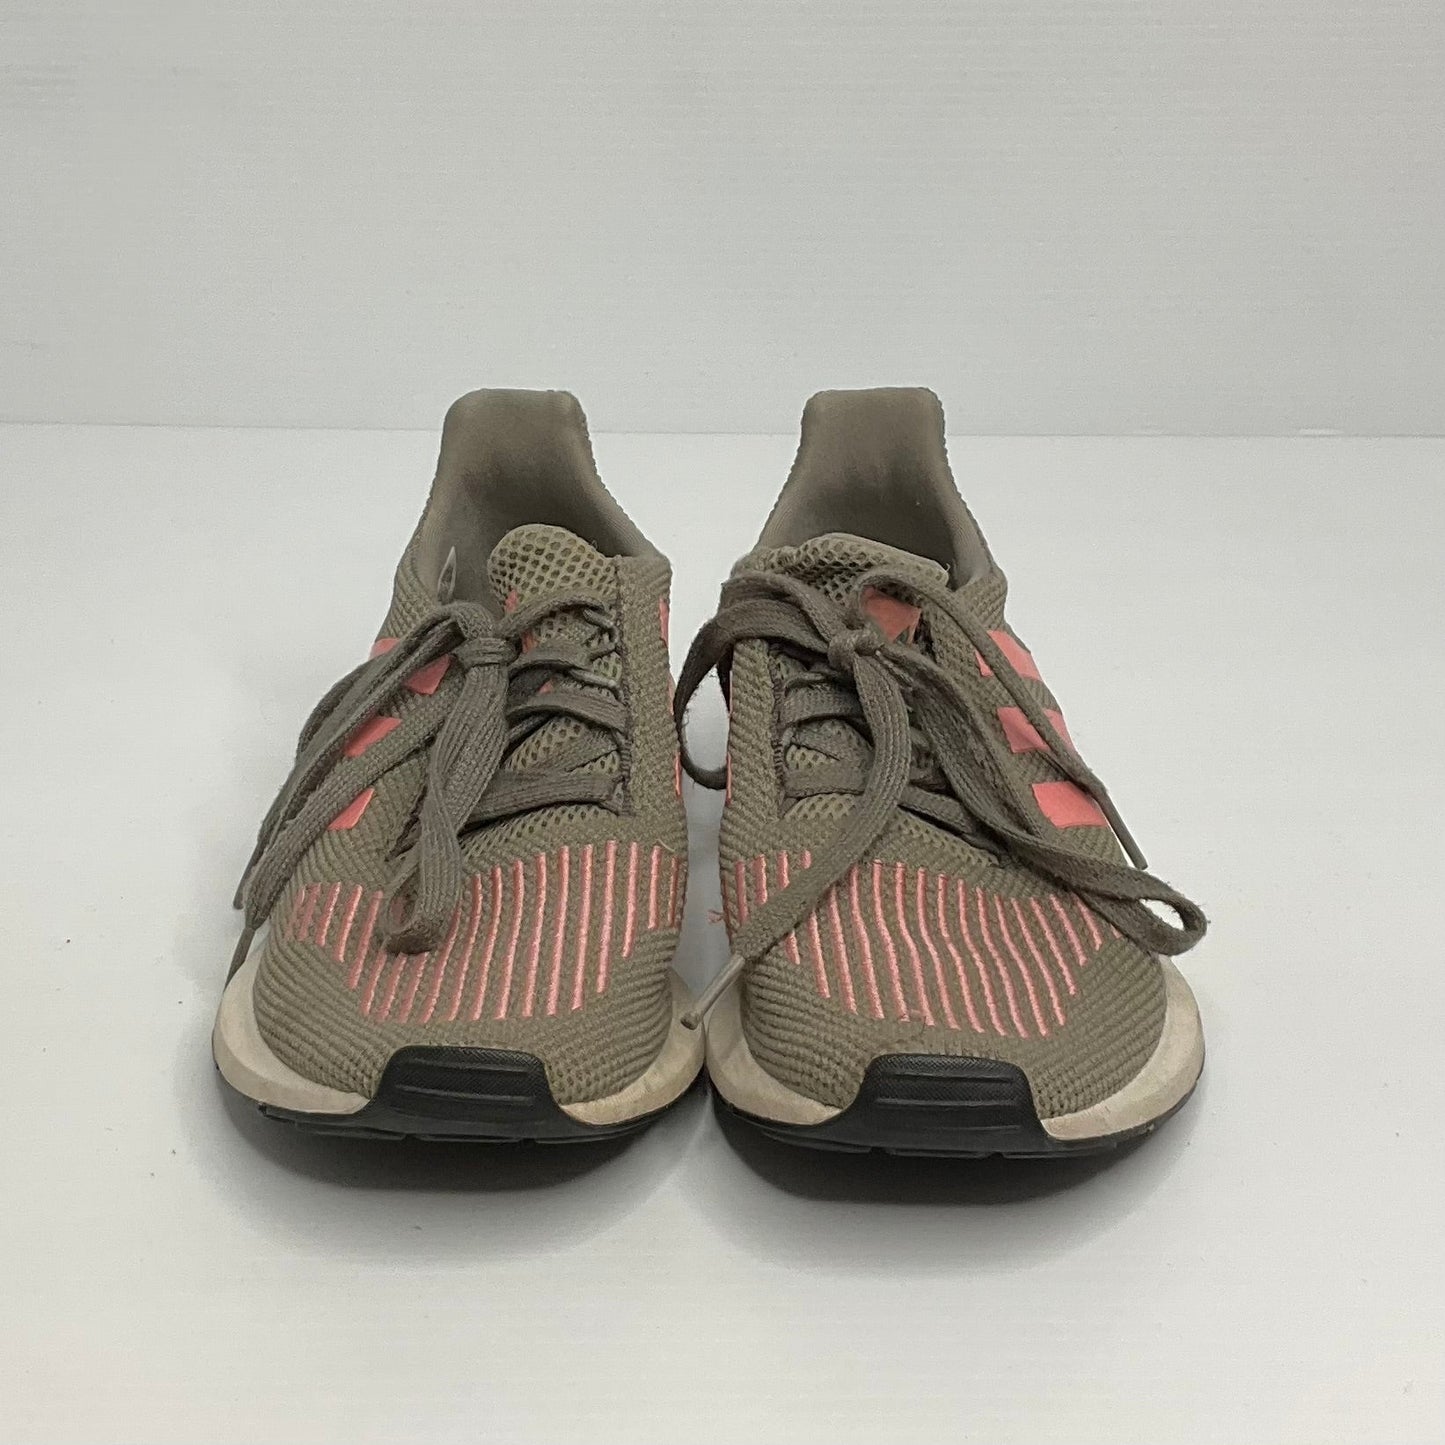 Pink & Tan Shoes Sneakers Adidas, Size 6.5